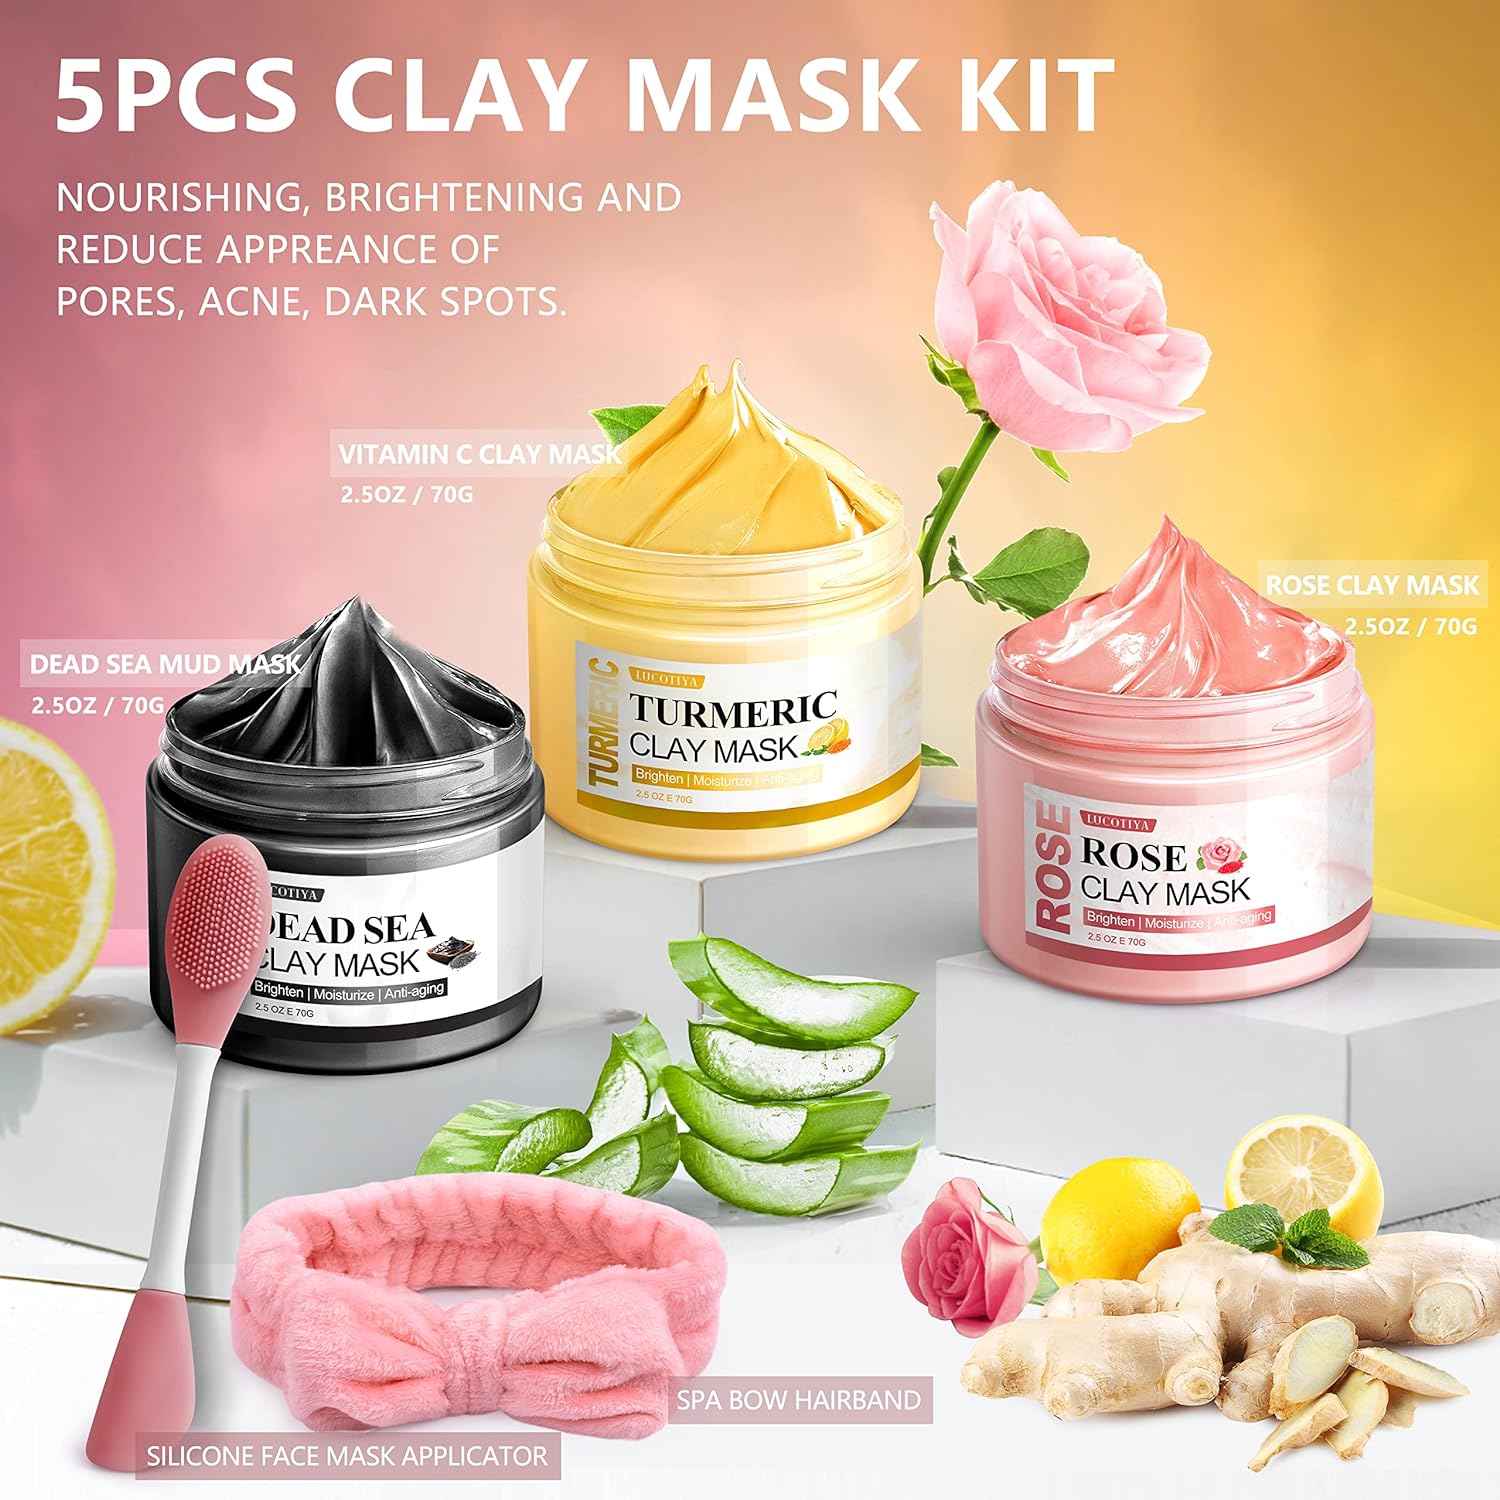 5 Pcs Face Mask Skin Care Set for Deep Pore Cleansing Turmeric Vitamin C Clay Mask, Dead Sea Mud Mask, Rose Clay Mask for Face Masks Skincare Personal Skin Care Products Gifts Headbands for Women